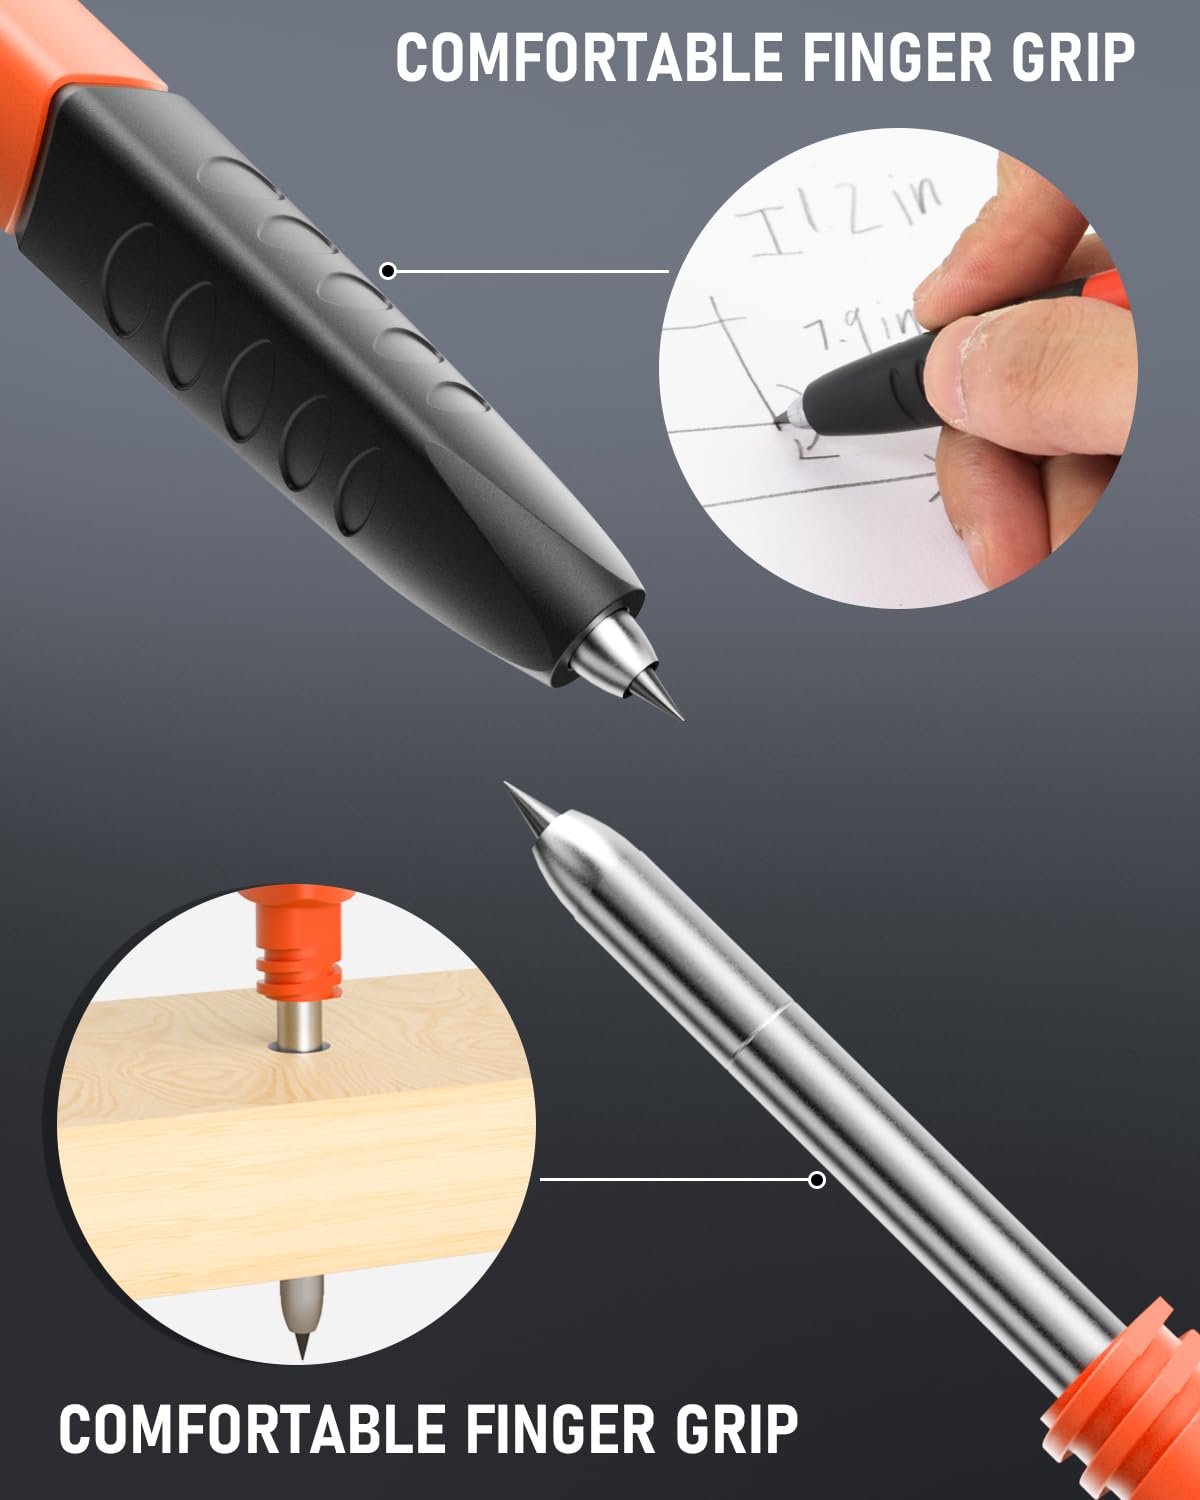 Nicpro Carpenter's Pencil Set, 1 Solid Carpenter's Pencils with 12 Versatile Leads, Mechanical Pencil Marker, Deep Hole Marker Pencil with Built-in Sharpener for Woodworking, Construction Site with